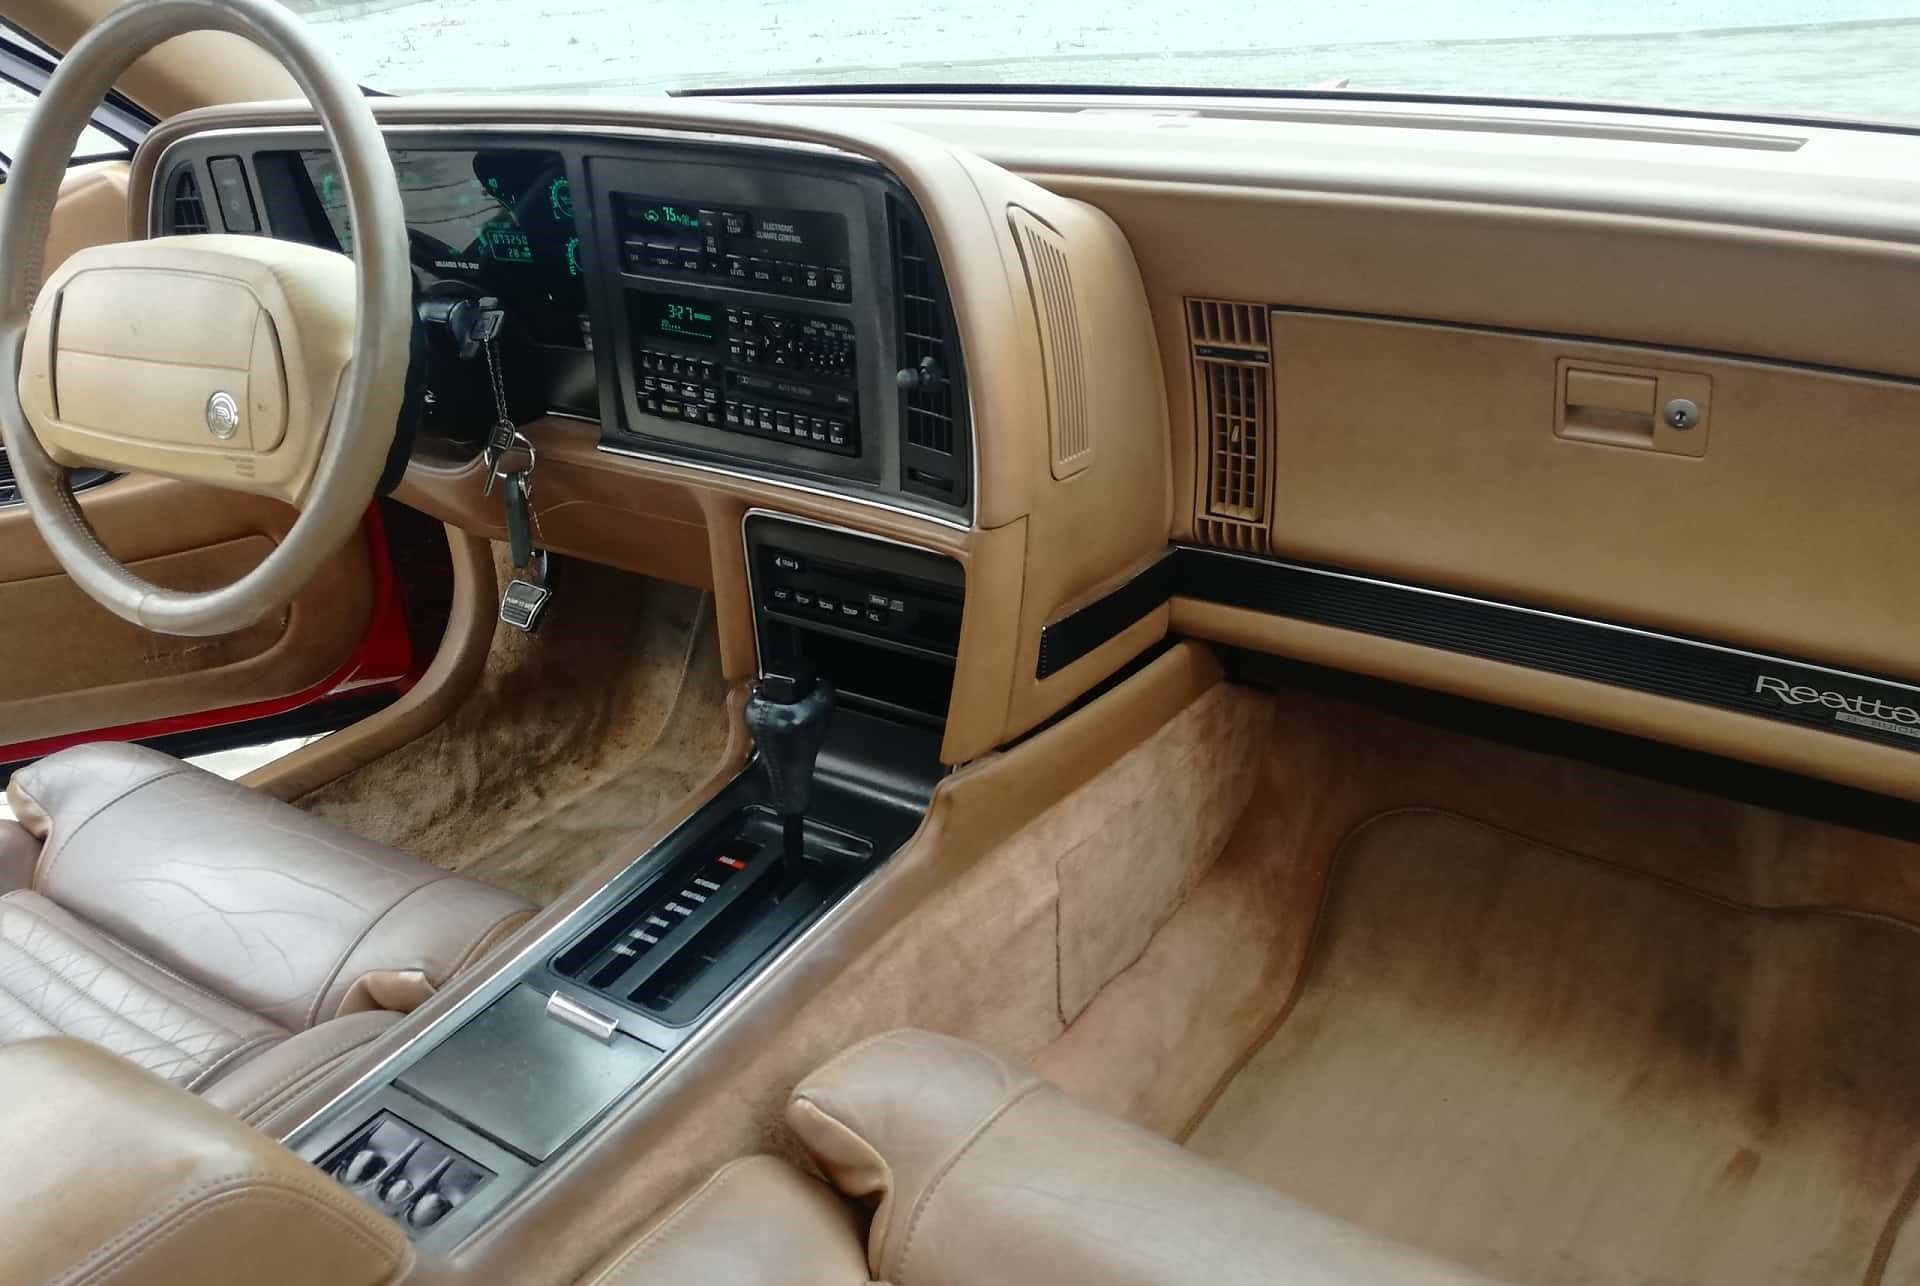 These Are The Most Hideous Car Interiors Manufacturers Got Away With